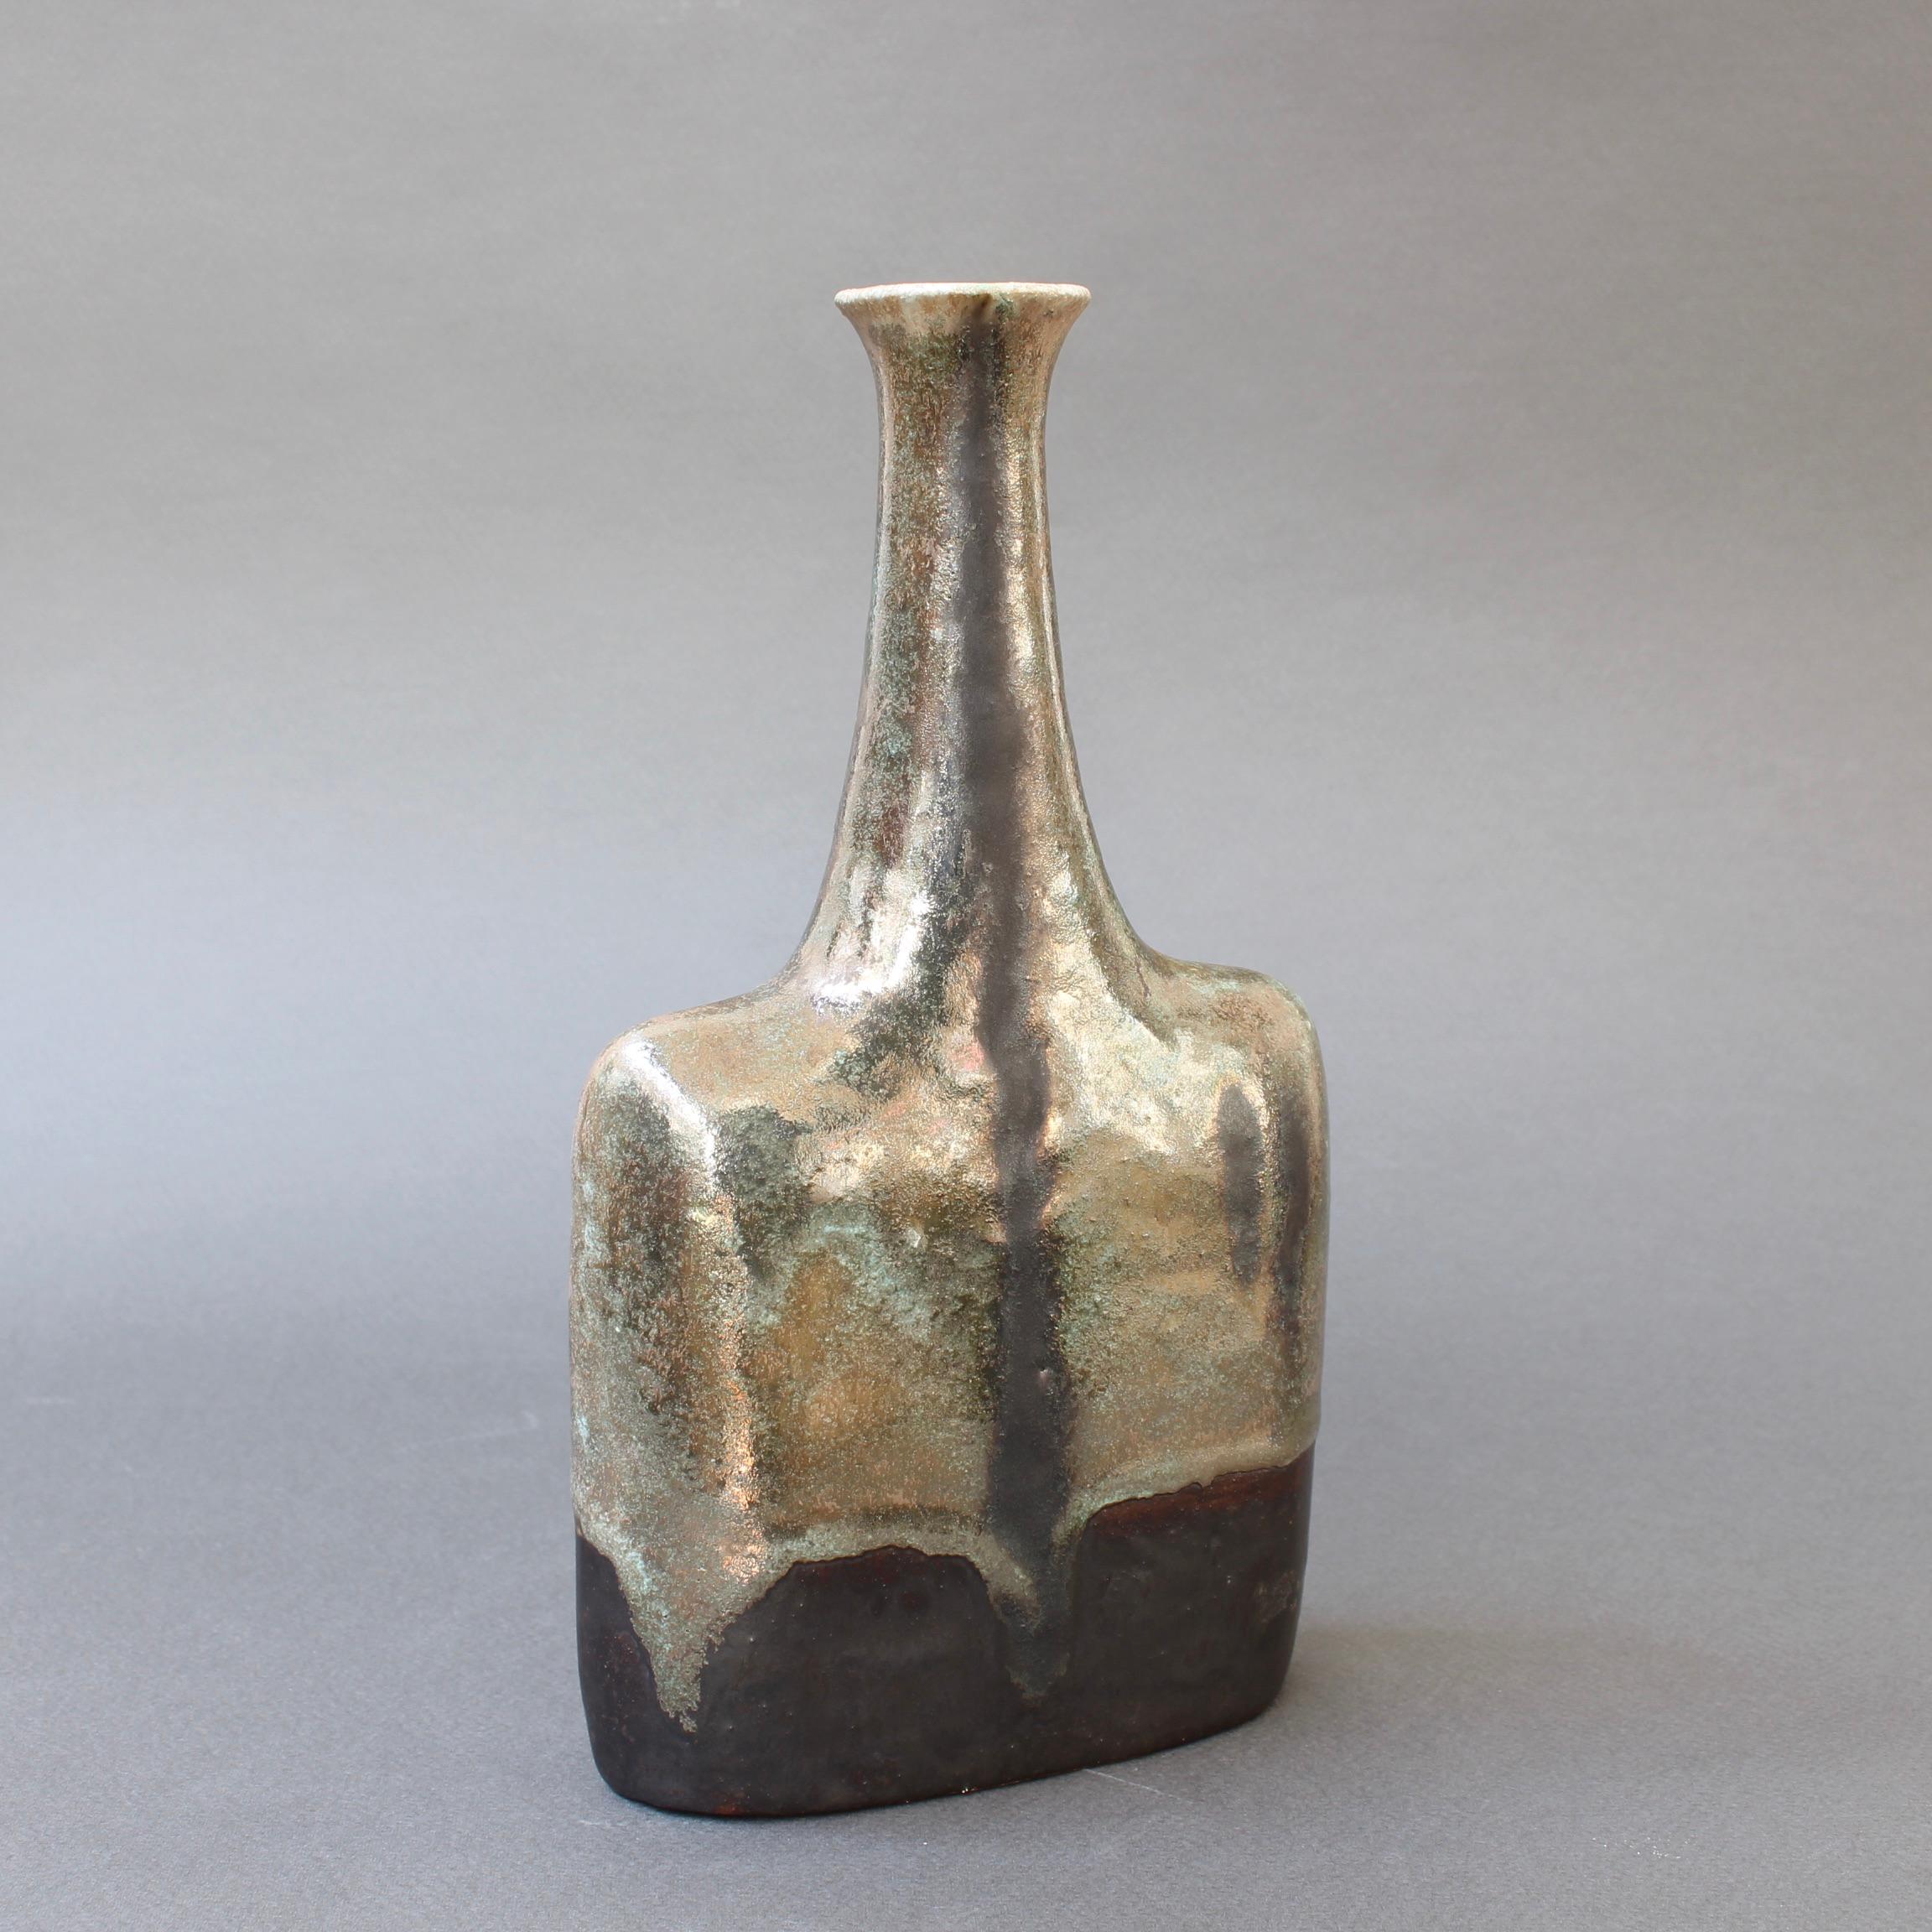 Ceramic vase / bottle with metallic-sheen glaze and verdigris drip motif by ceramicist Bruno Gambone, circa 1980s. This elegant, narrow-opening bottle-shaped vase is a work of art. There is a rectangular body with soft, curvy shoulders leading to a